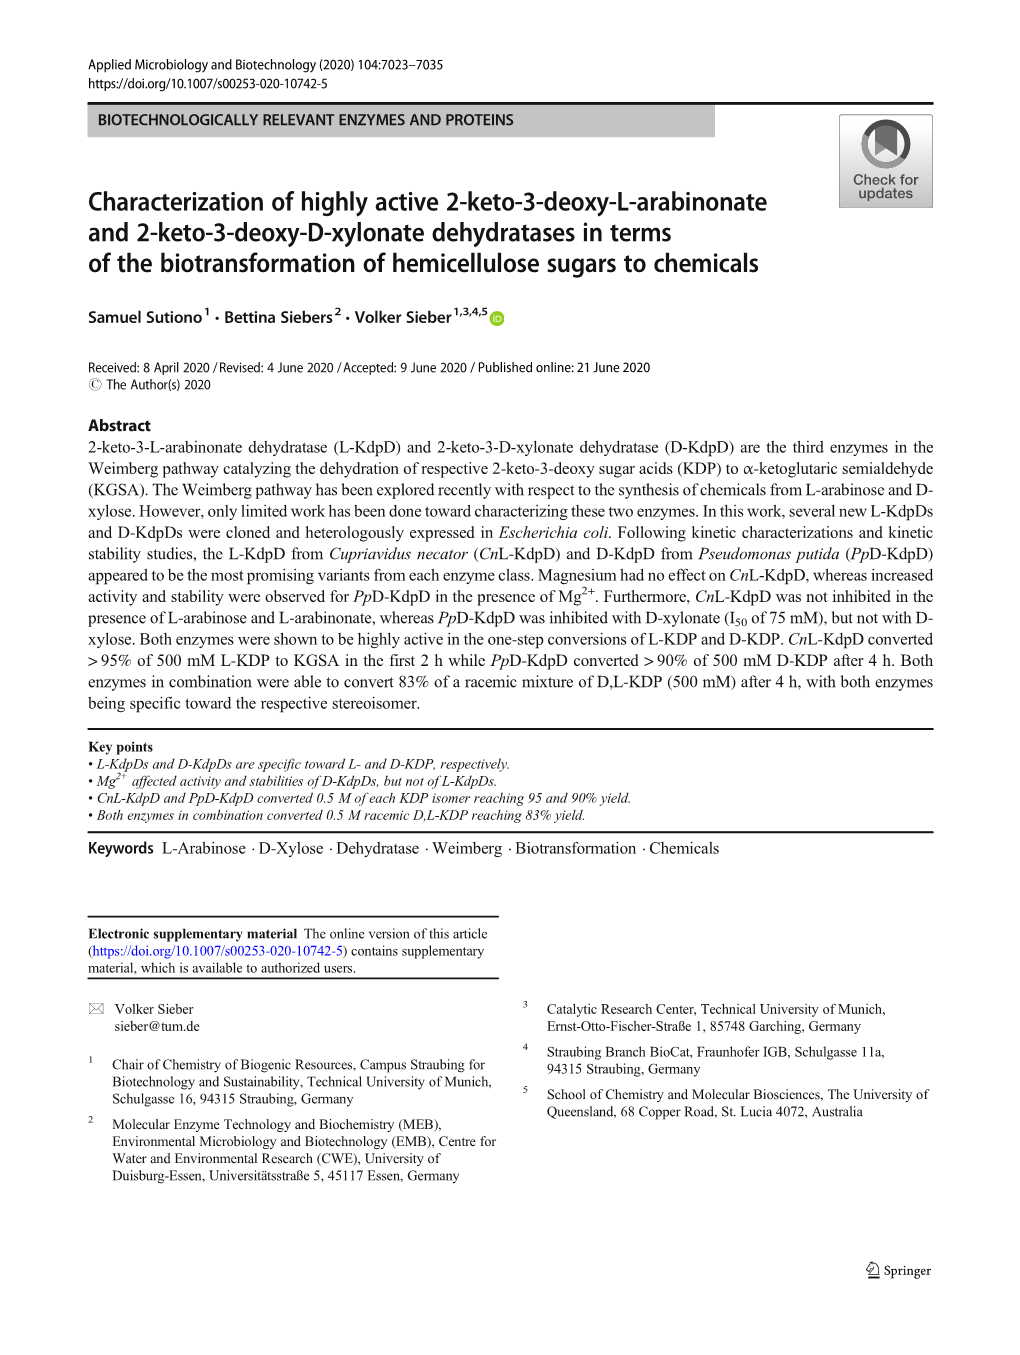 Characterization of Highly Active 2-Keto-3-Deoxy-L